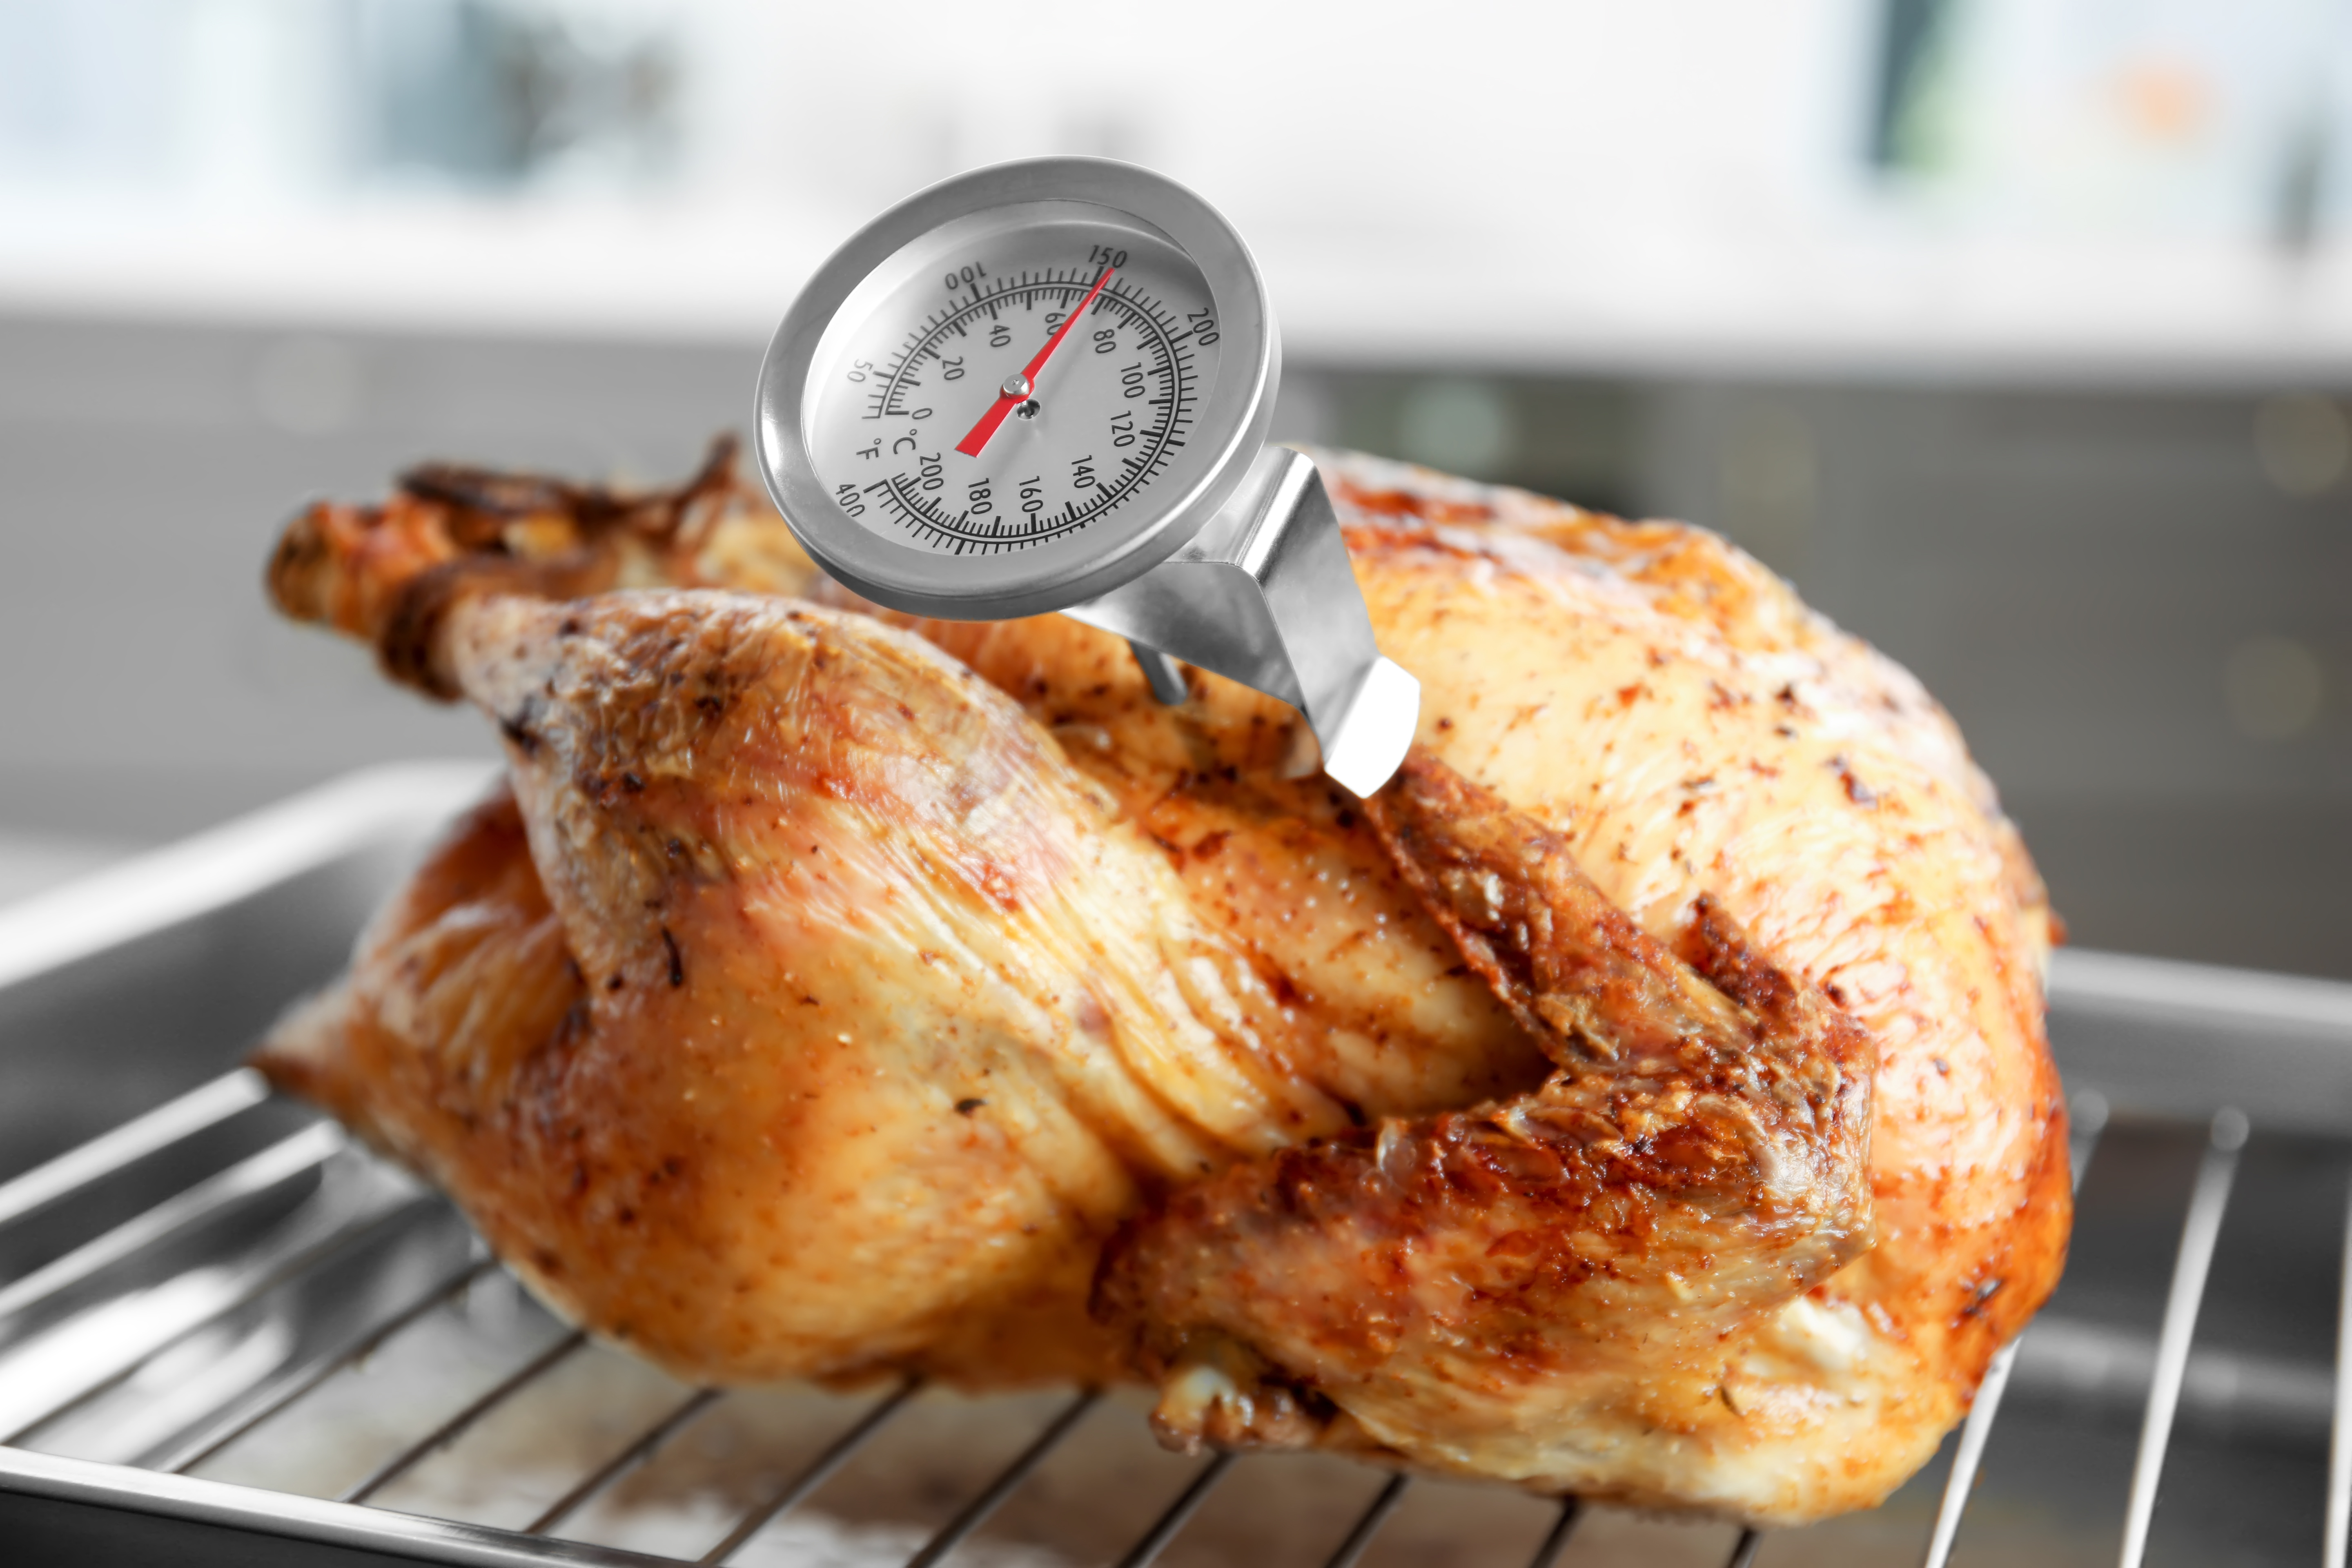 Do You Know the Correct Place to Insert Your Food Thermometer?